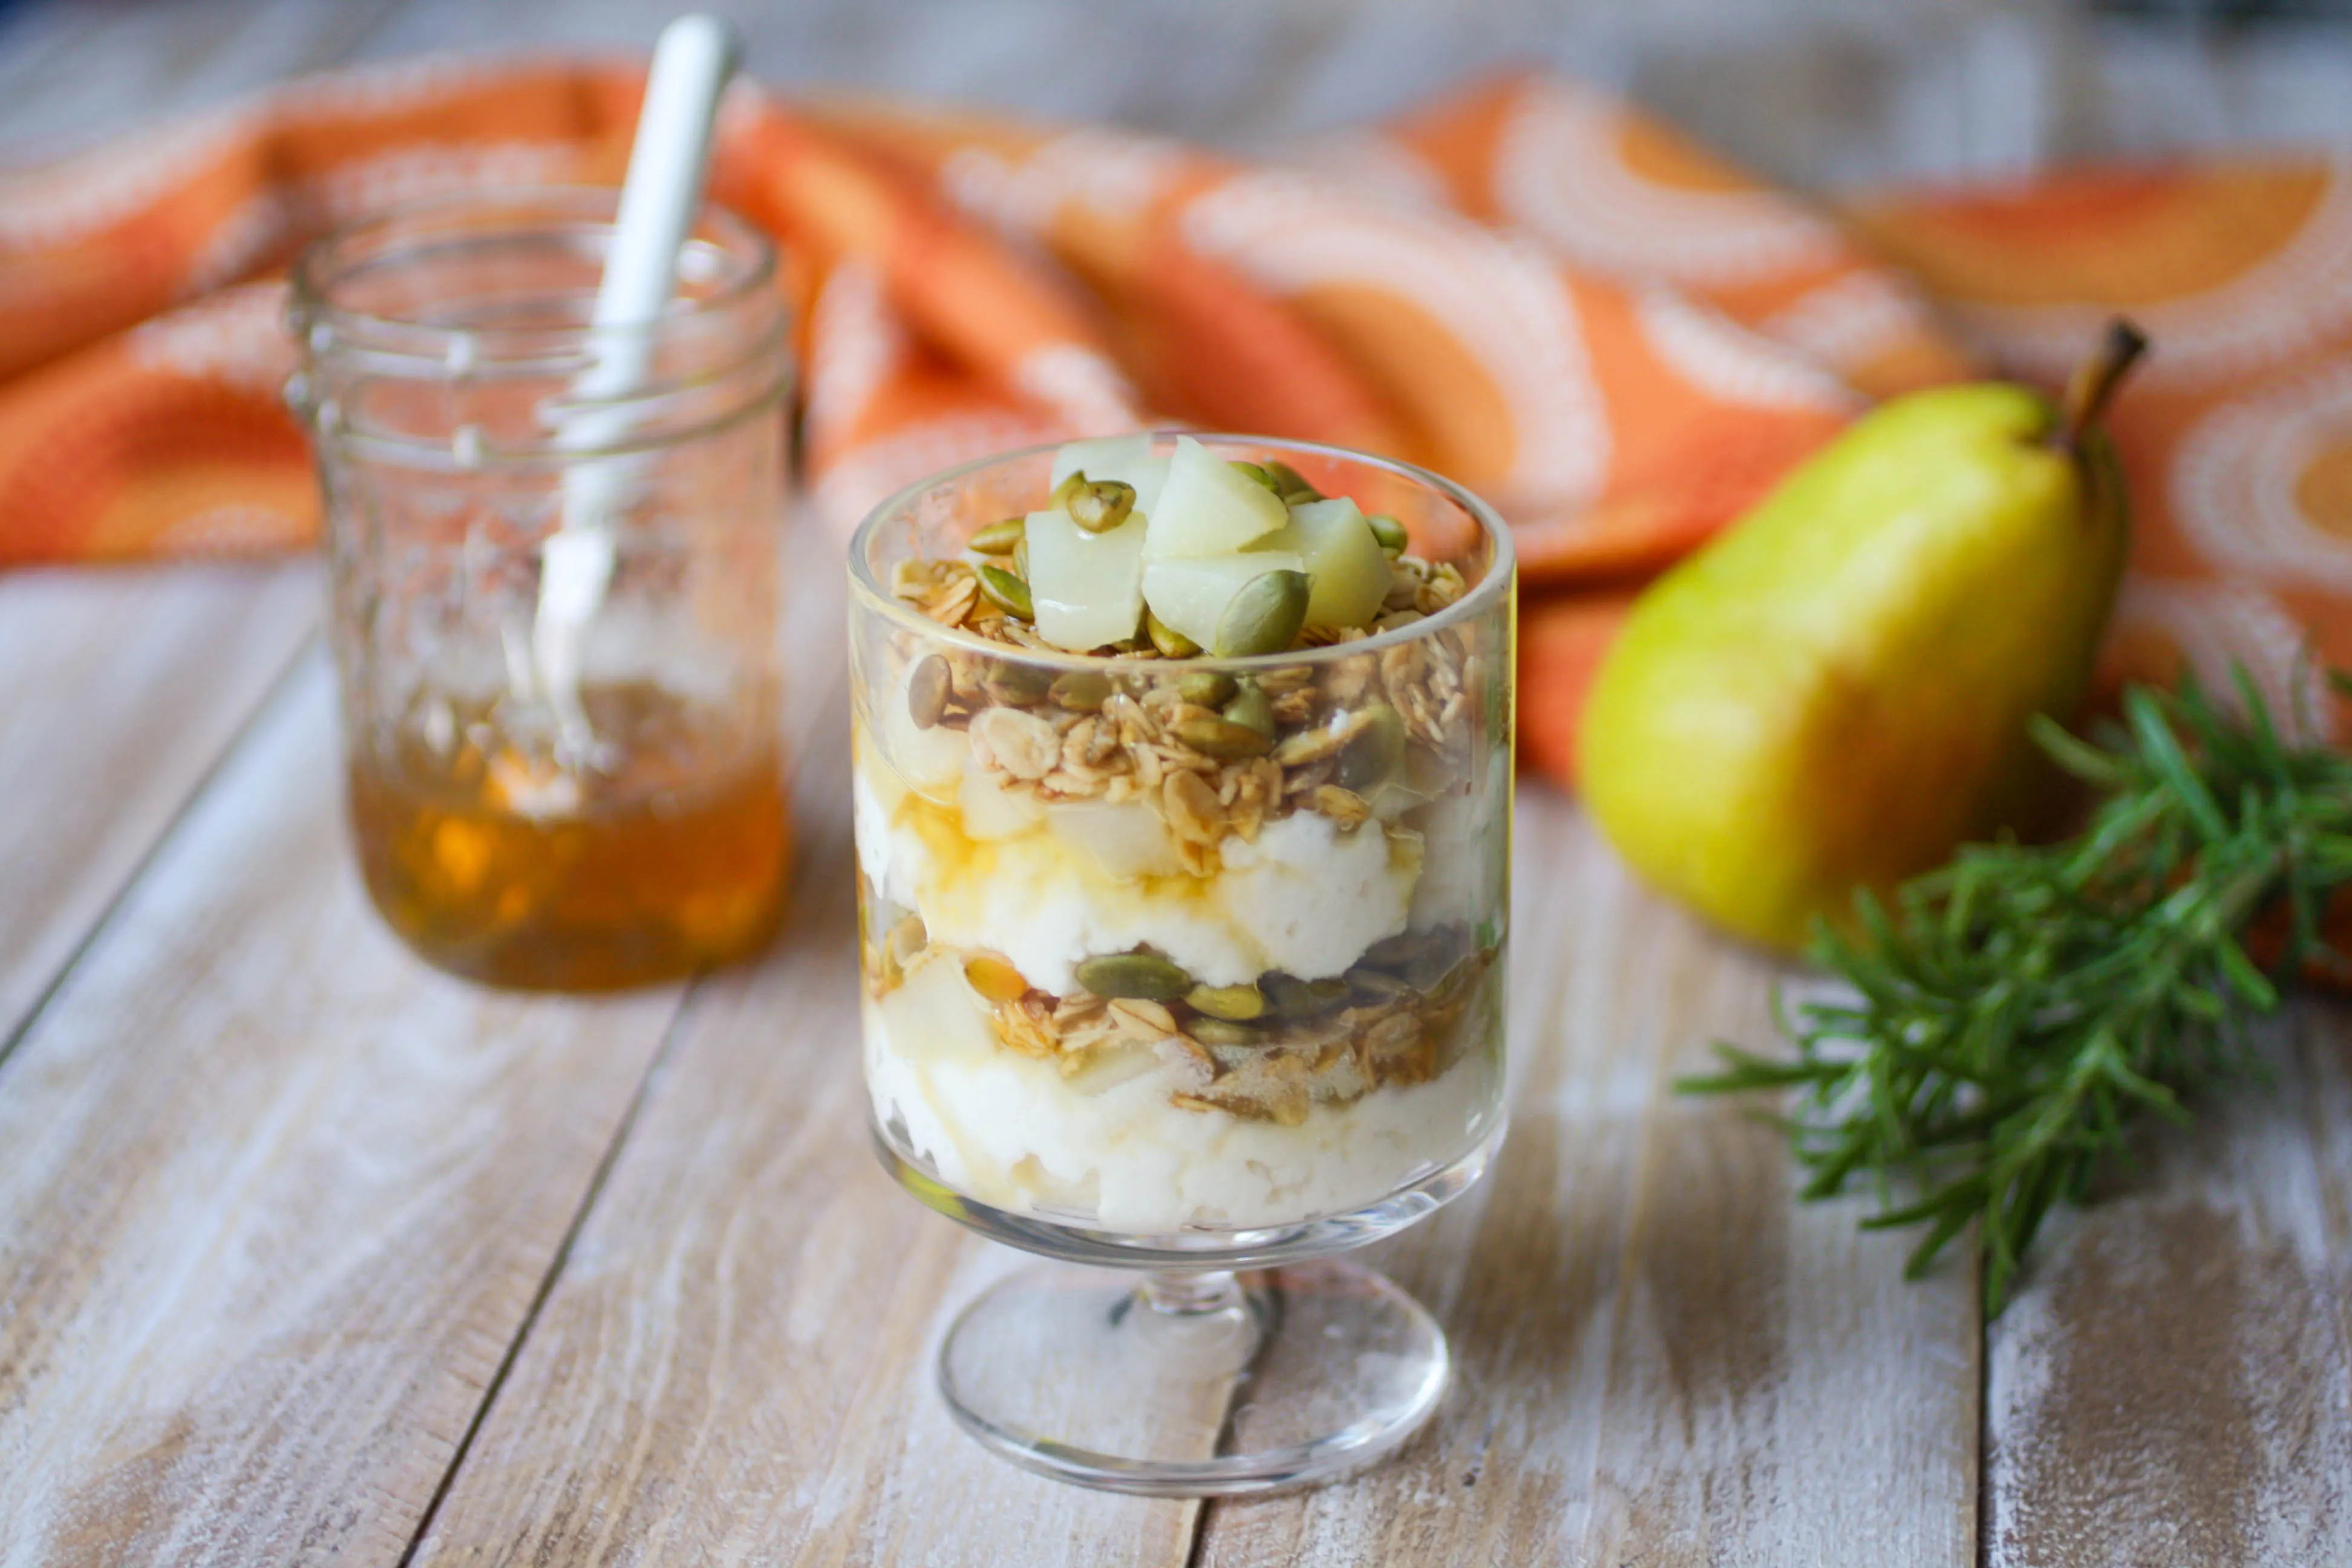 Pear and Ricotta Parfaits with Rosemary-Infused Honey is a treat to enjoy for breakfast or dessert! You'll love these pear parfaits any time of day.